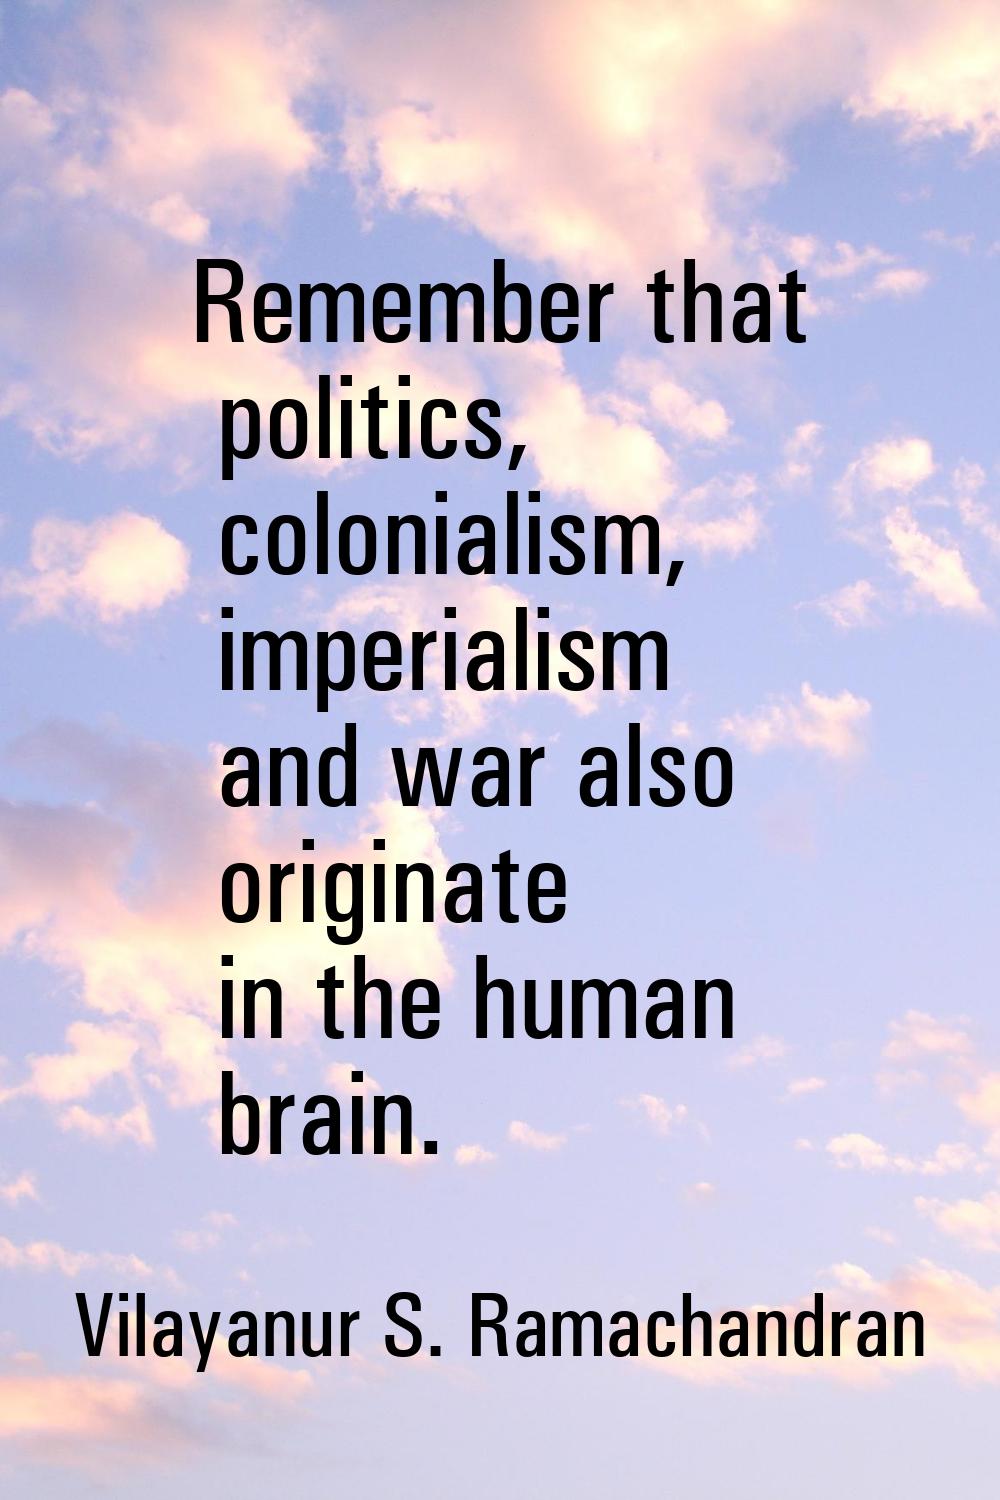 Remember that politics, colonialism, imperialism and war also originate in the human brain.